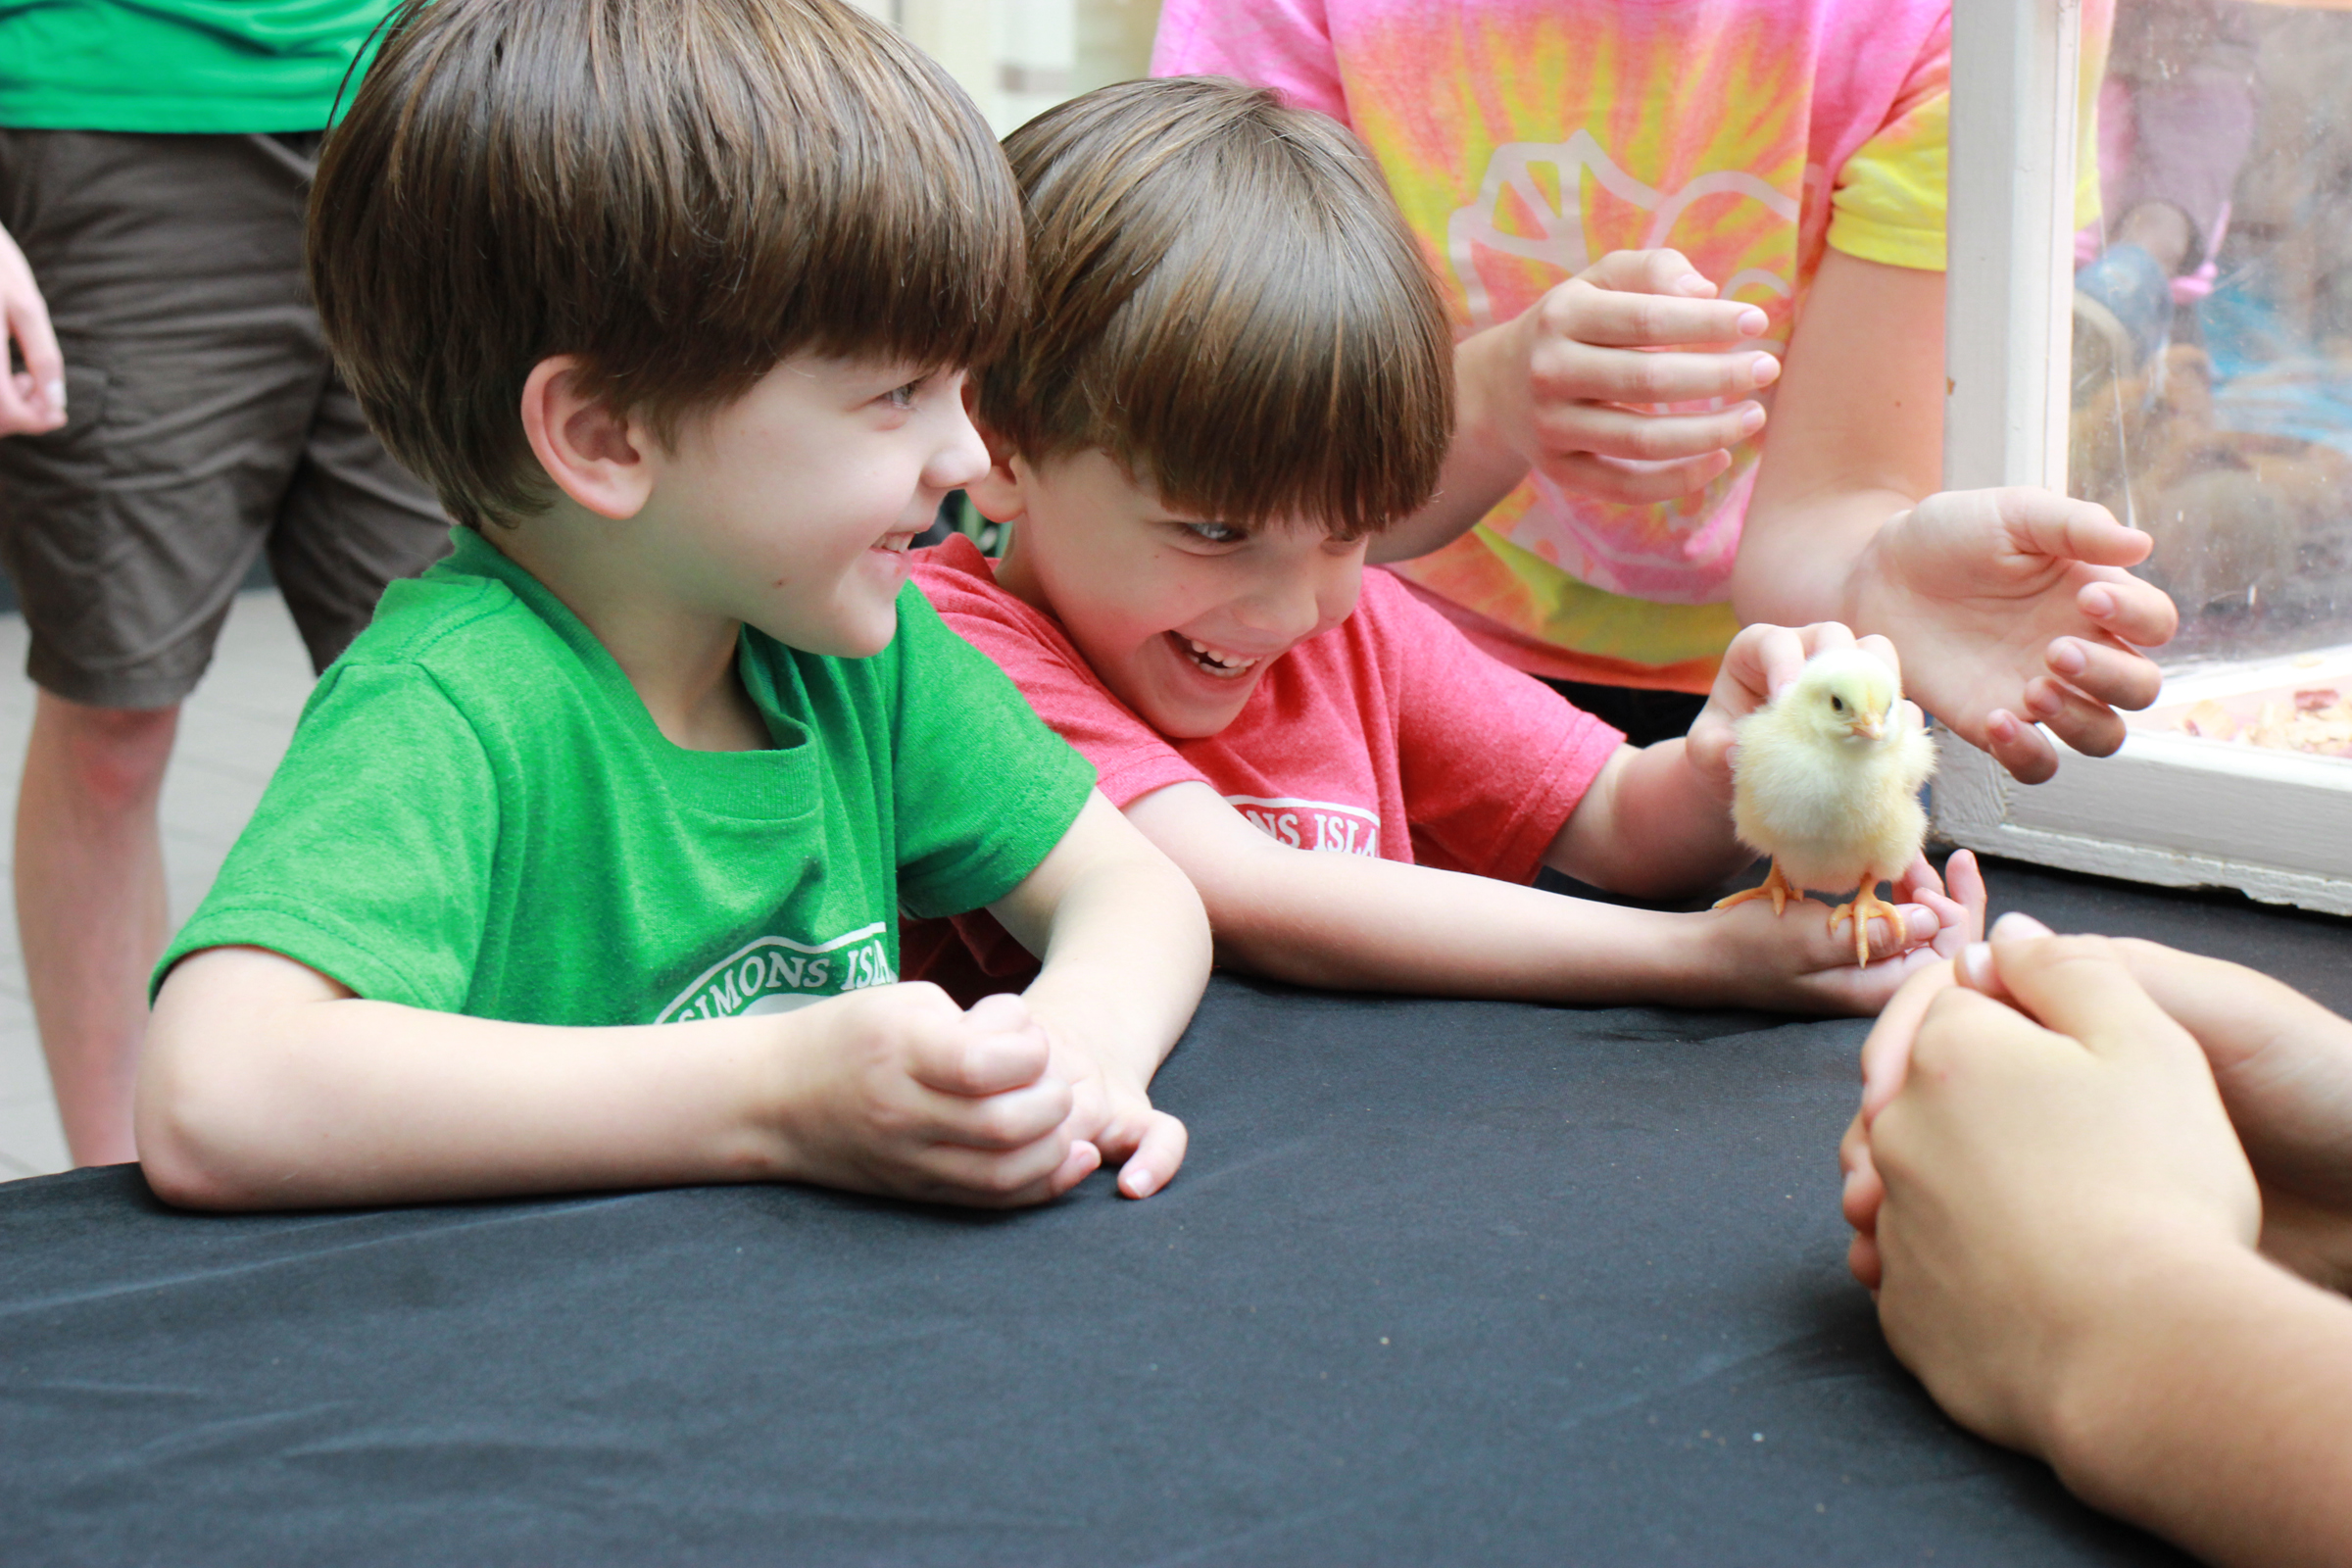  Excited kids meet a baby chicken in April 2015 during a pre-Easter event at Savannah's Oglethorpe Mall that was sponsored by the University of Georgia. &nbsp;(Dash Coleman/Savannah Morning News) &nbsp; 